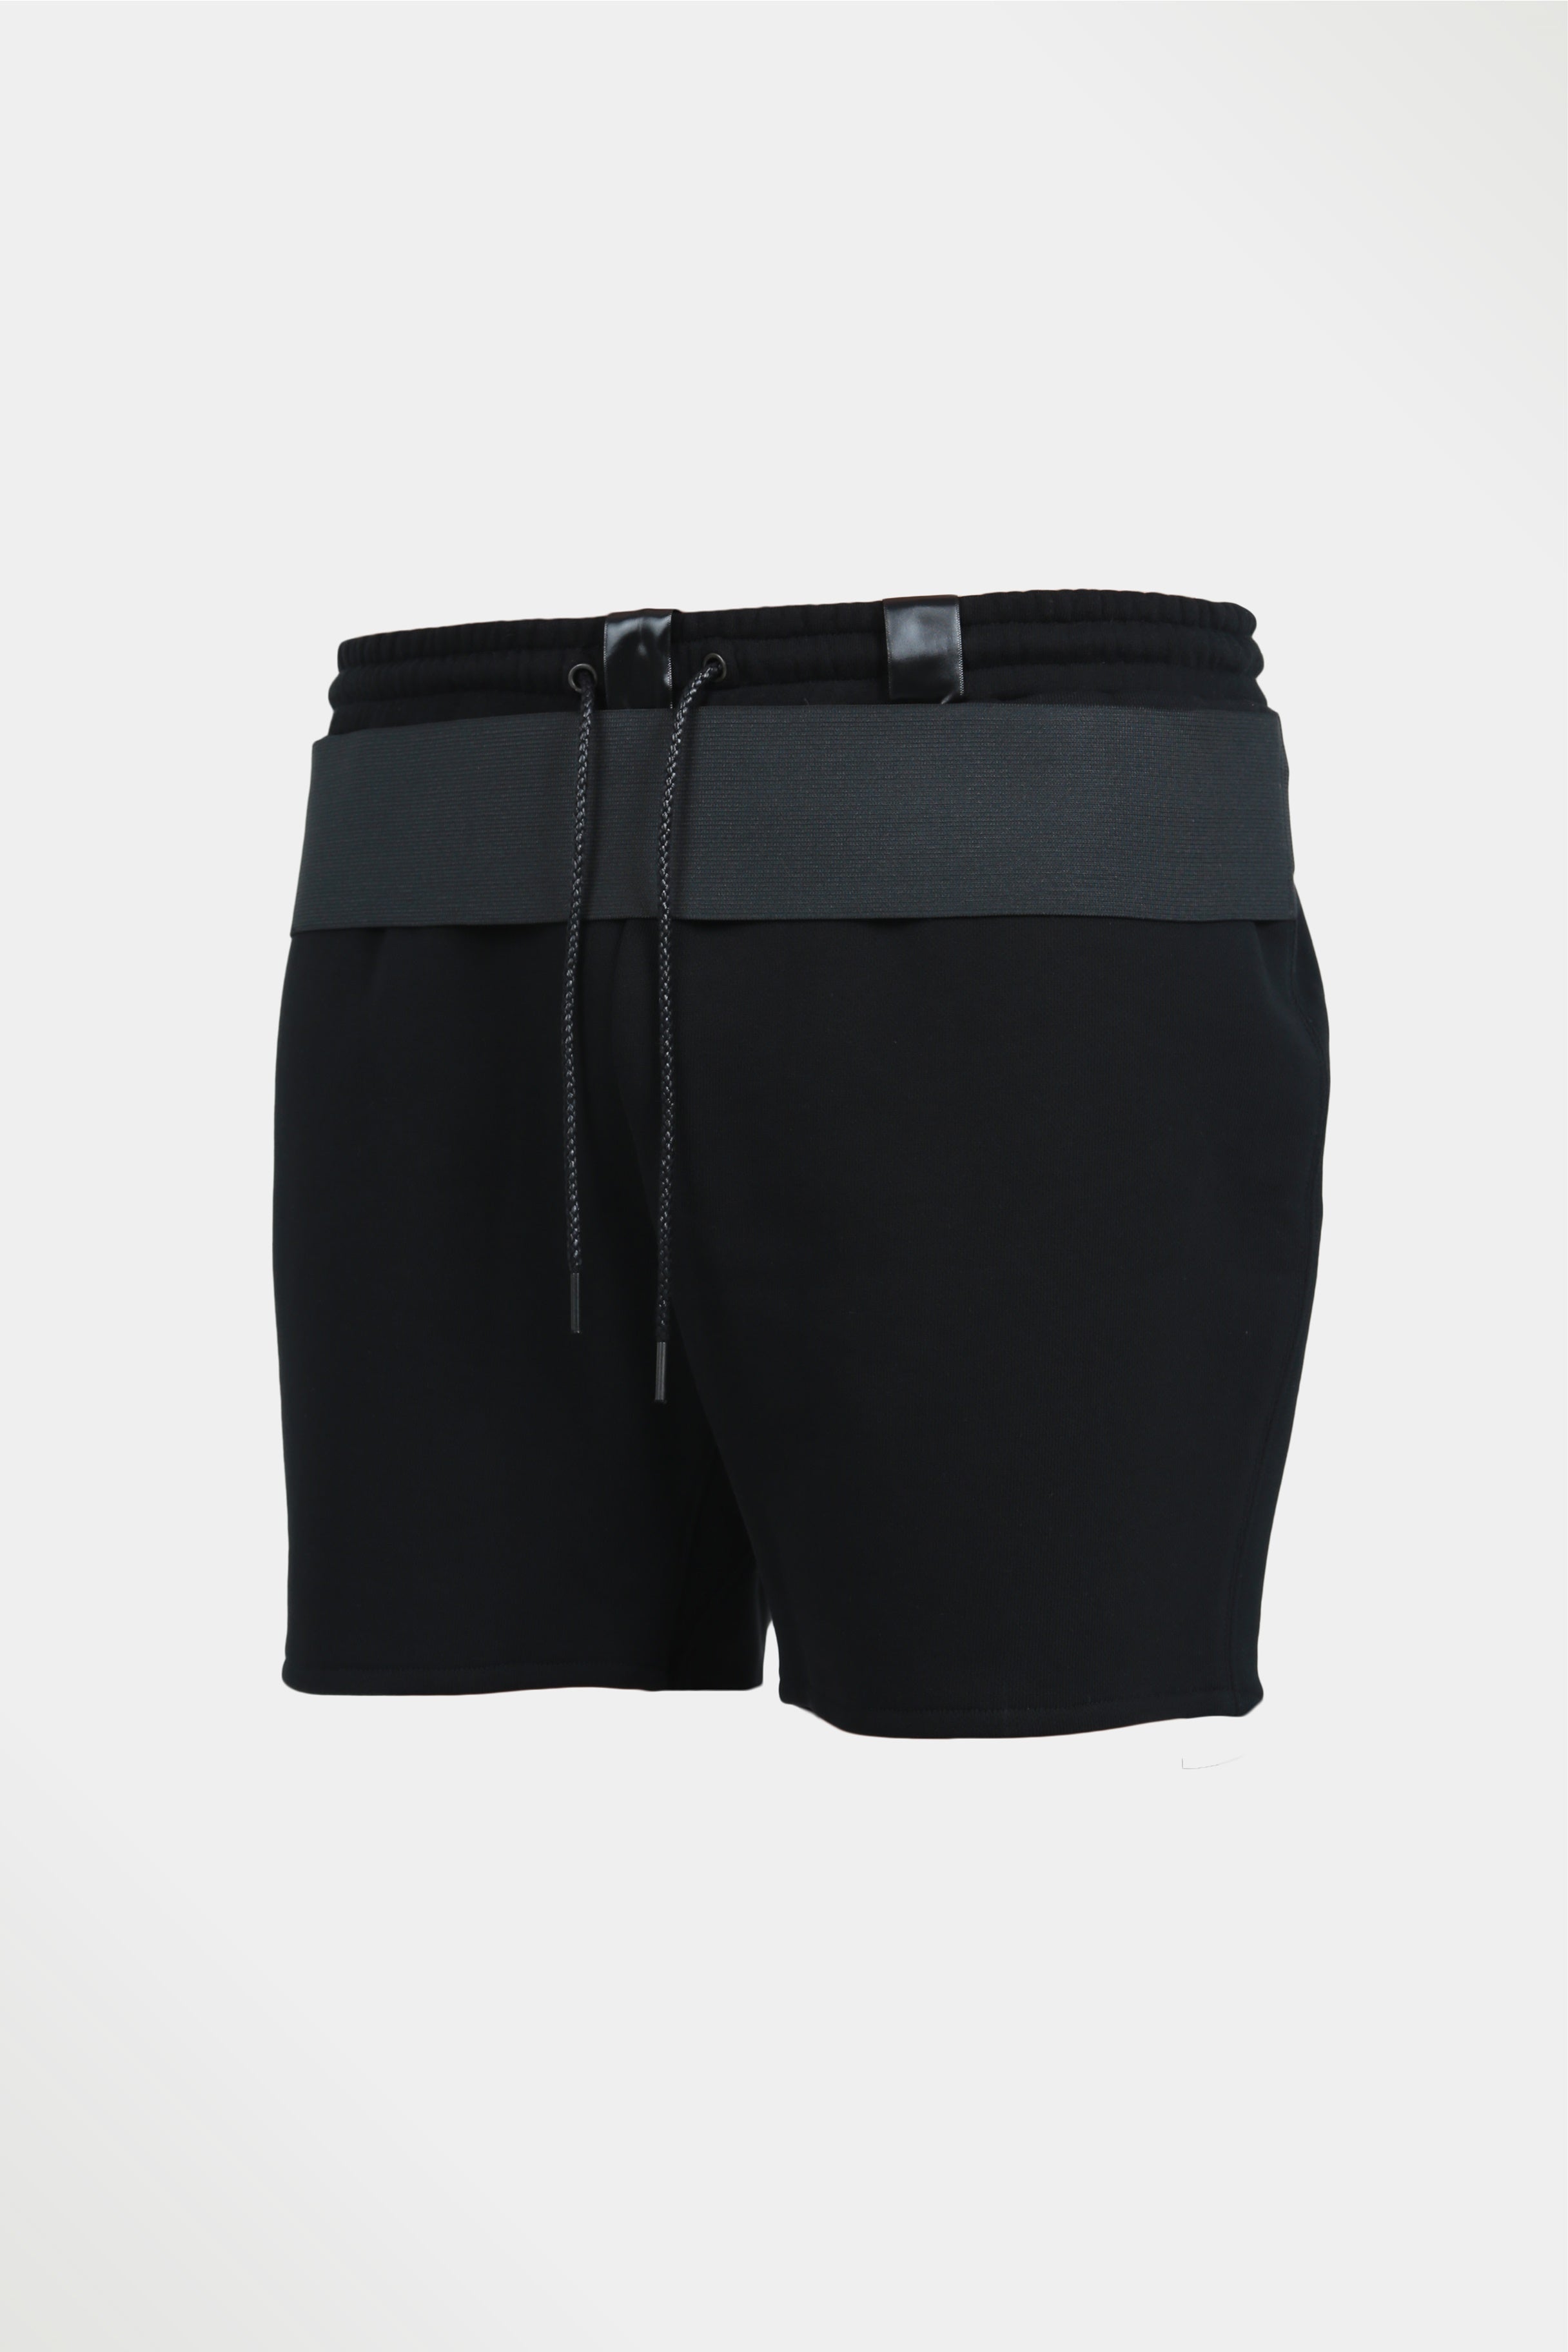 shorts tucked-in "pupil black"